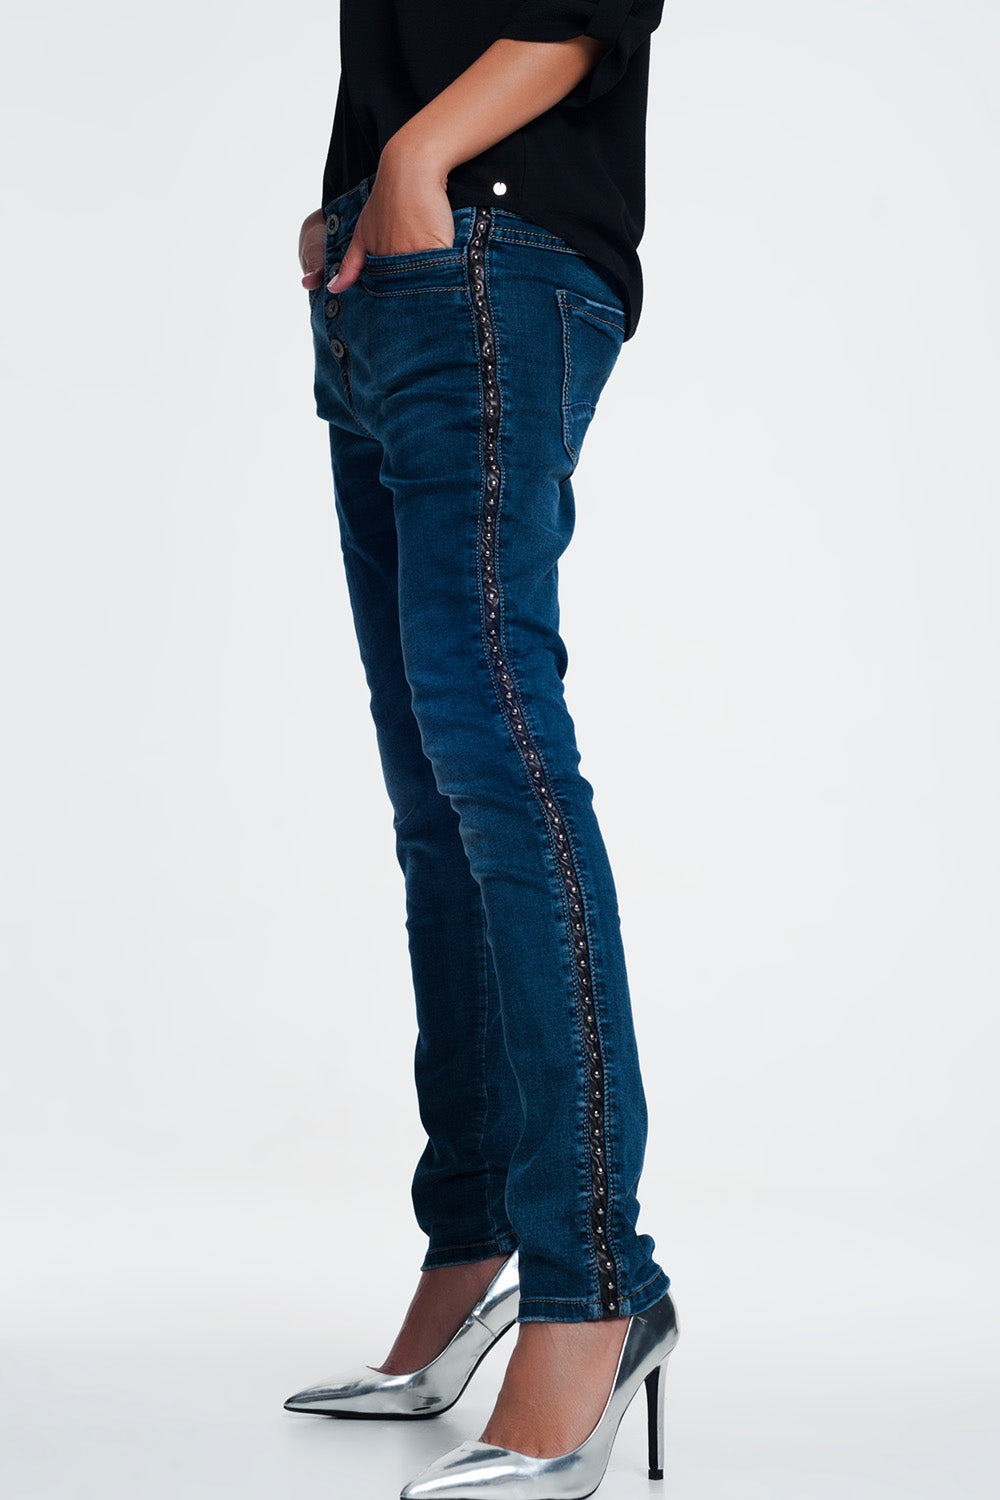 leather look studded JeansJeans